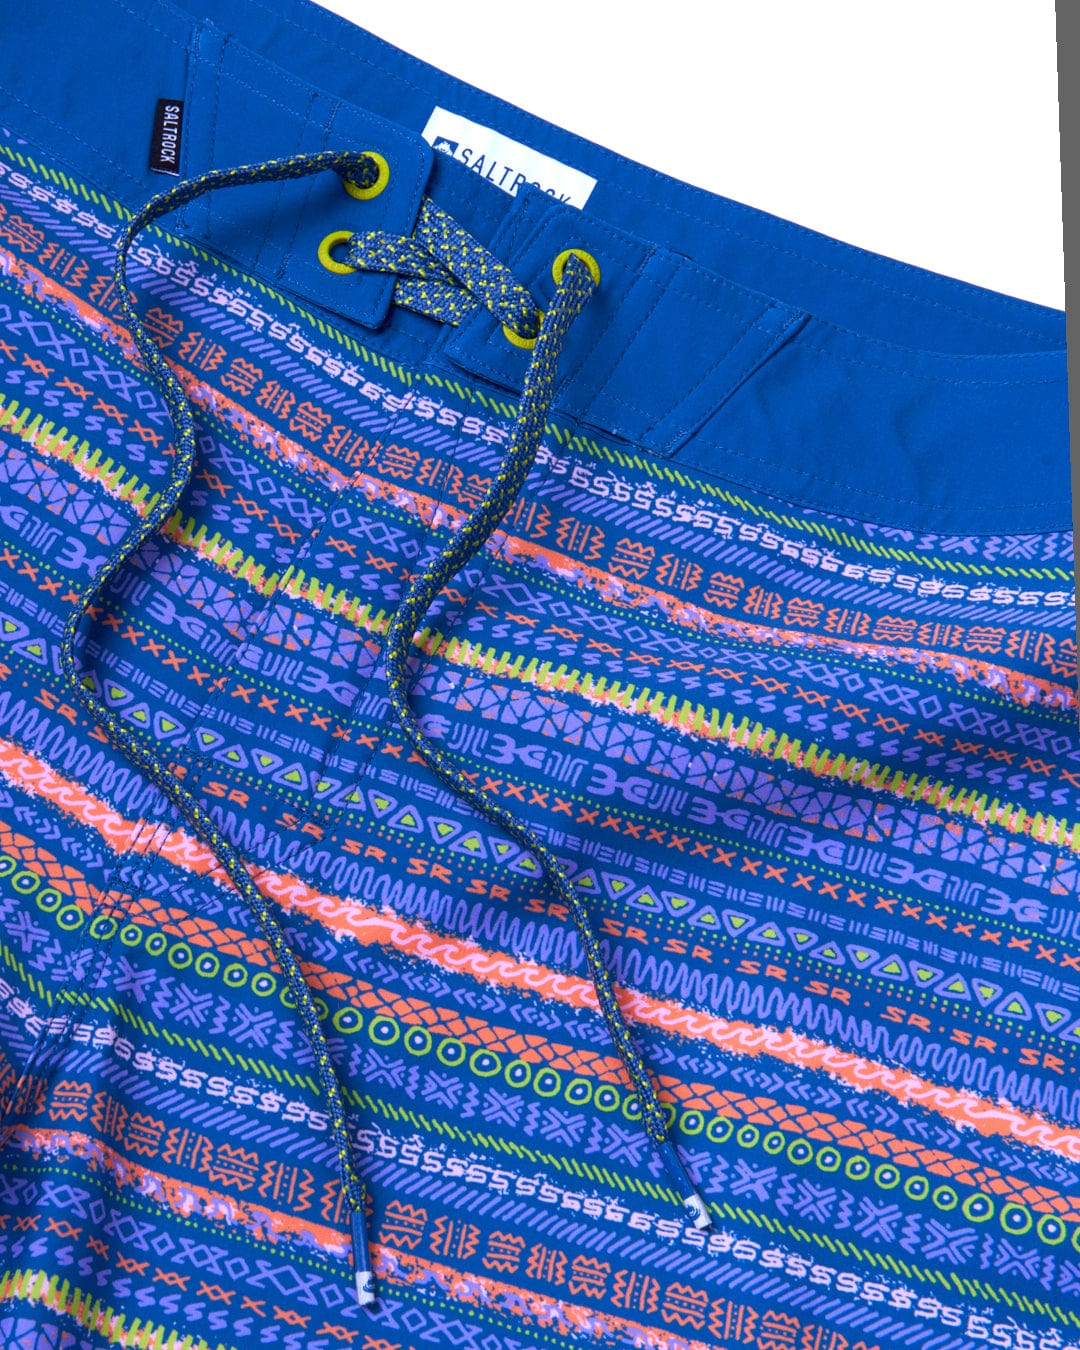 A pair of Silas - Mens Boardshorts - Blue Stripe from Saltrock, with a peached soft feel, made from Repreve recycled material.